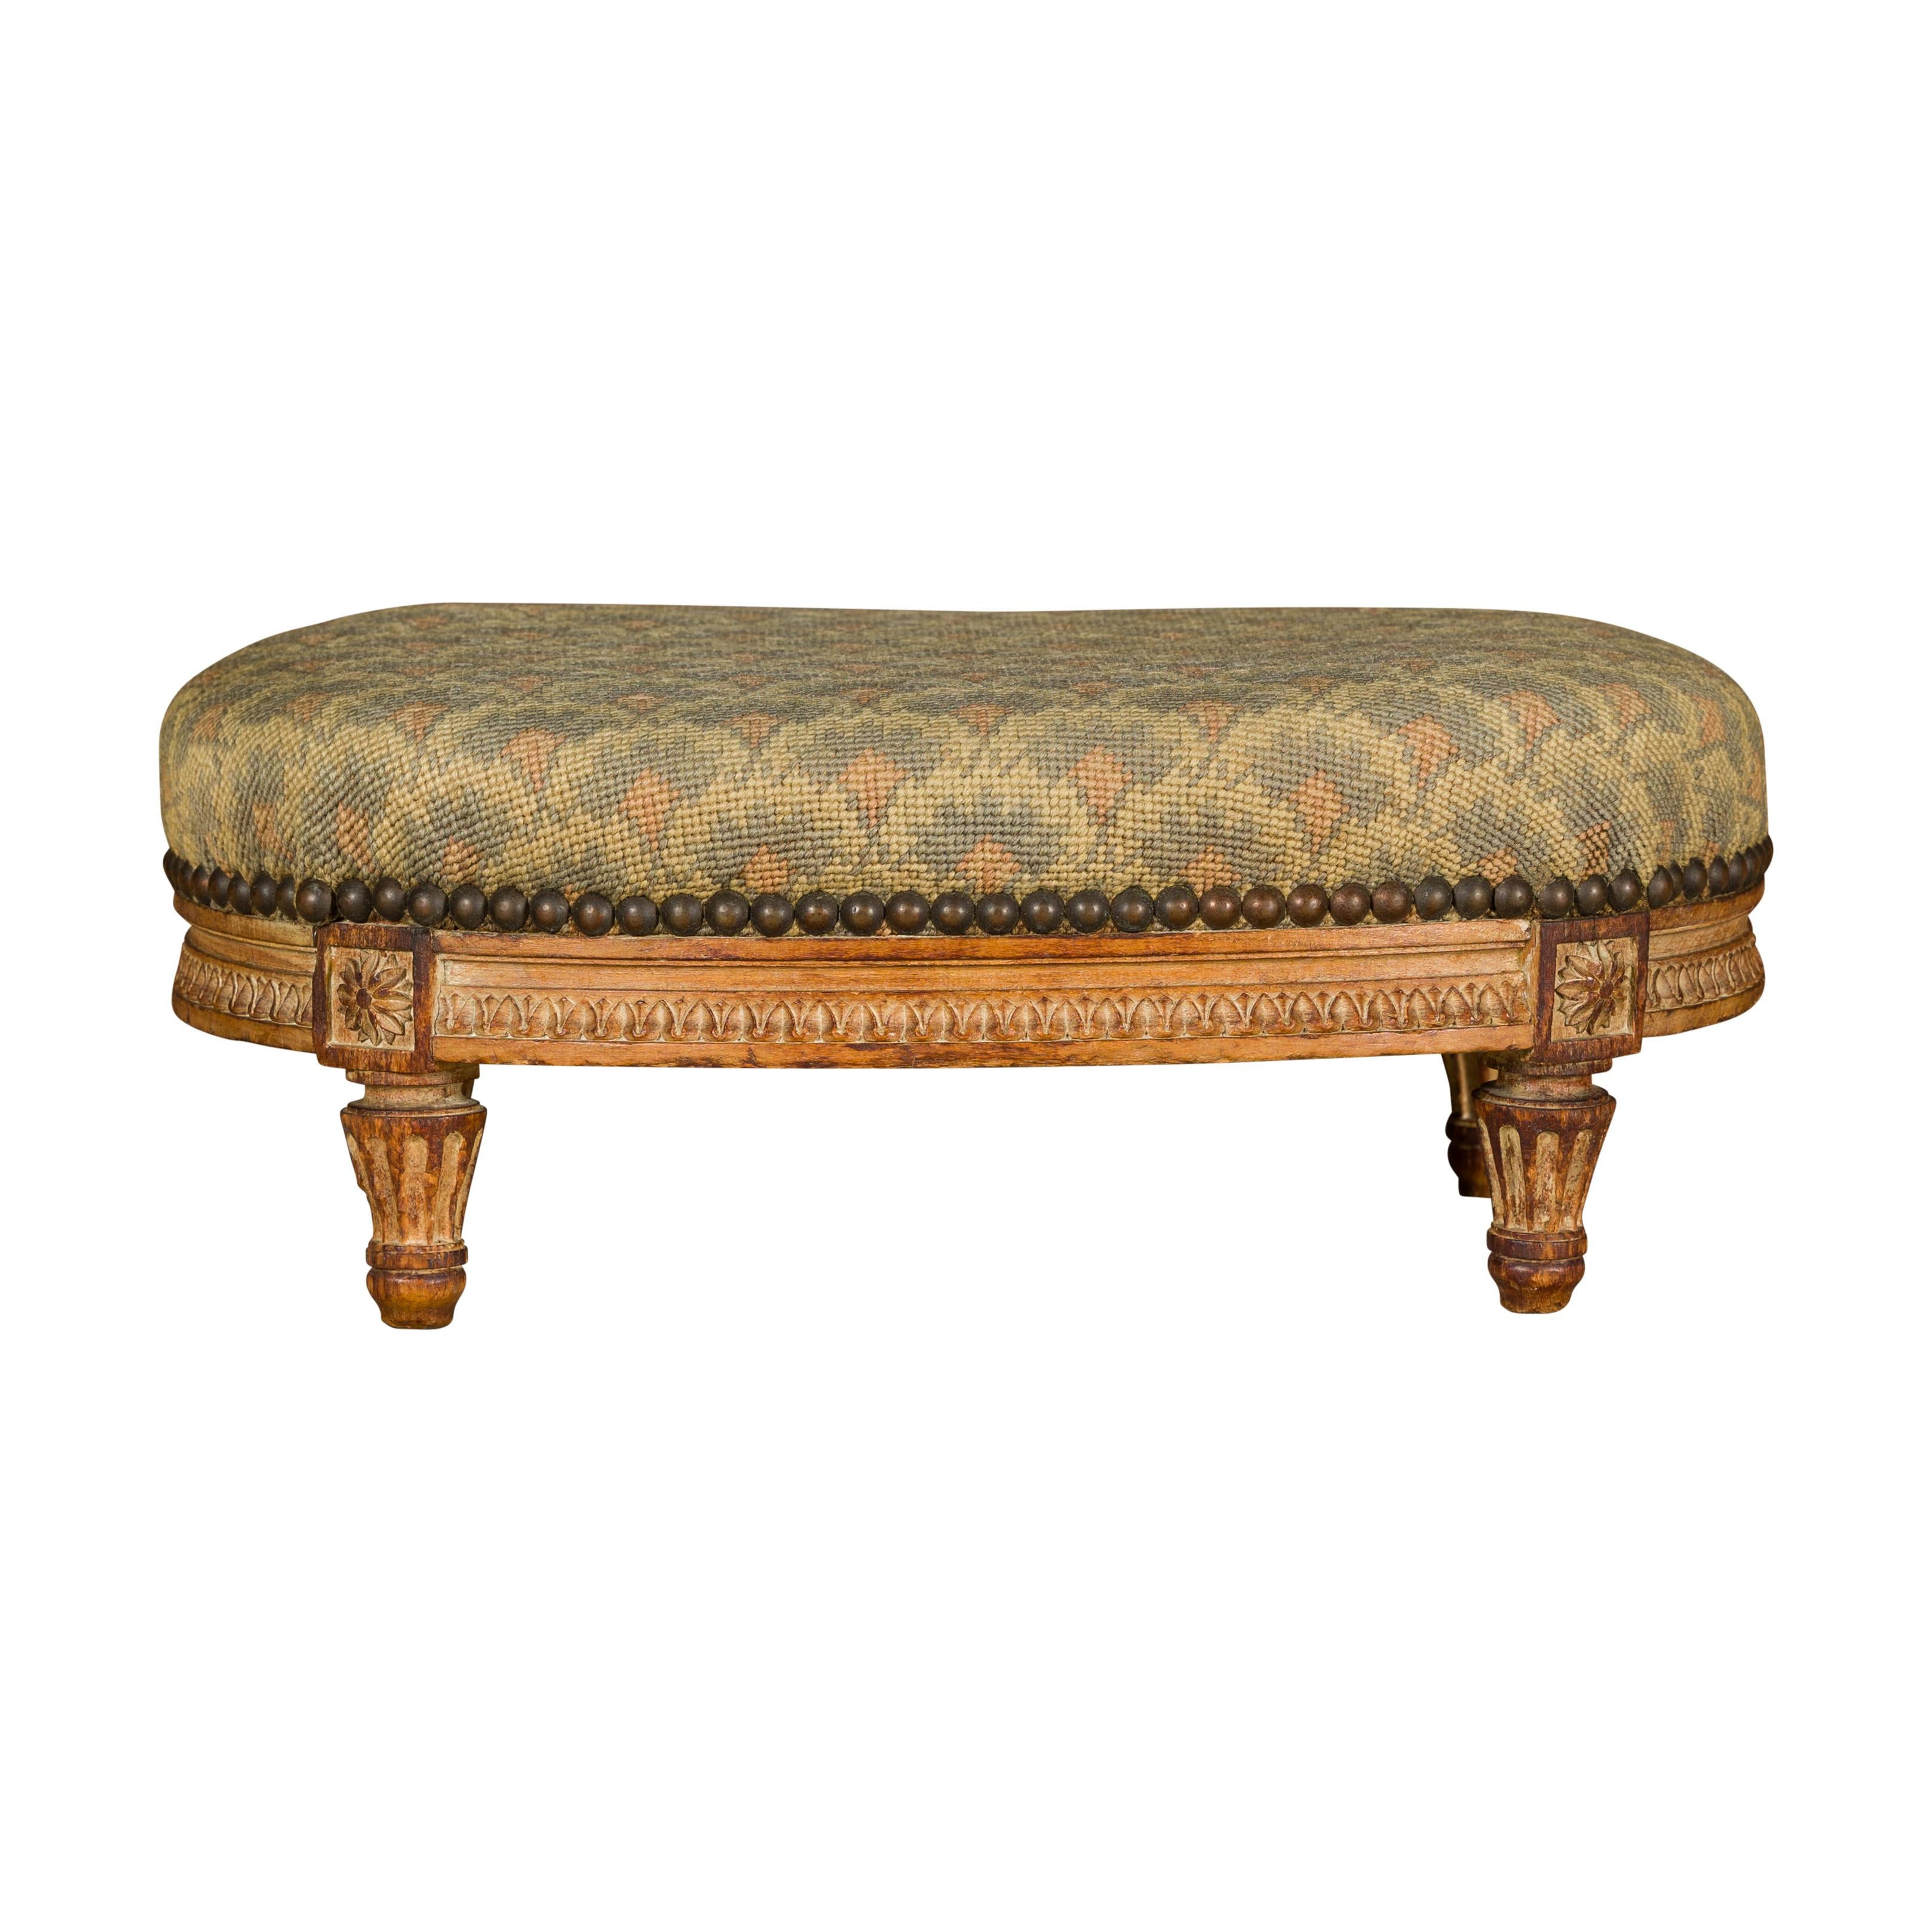 Louis XVI Style 19th Century French Stamped Pihouée Footstool with Carved Décor For Sale 11